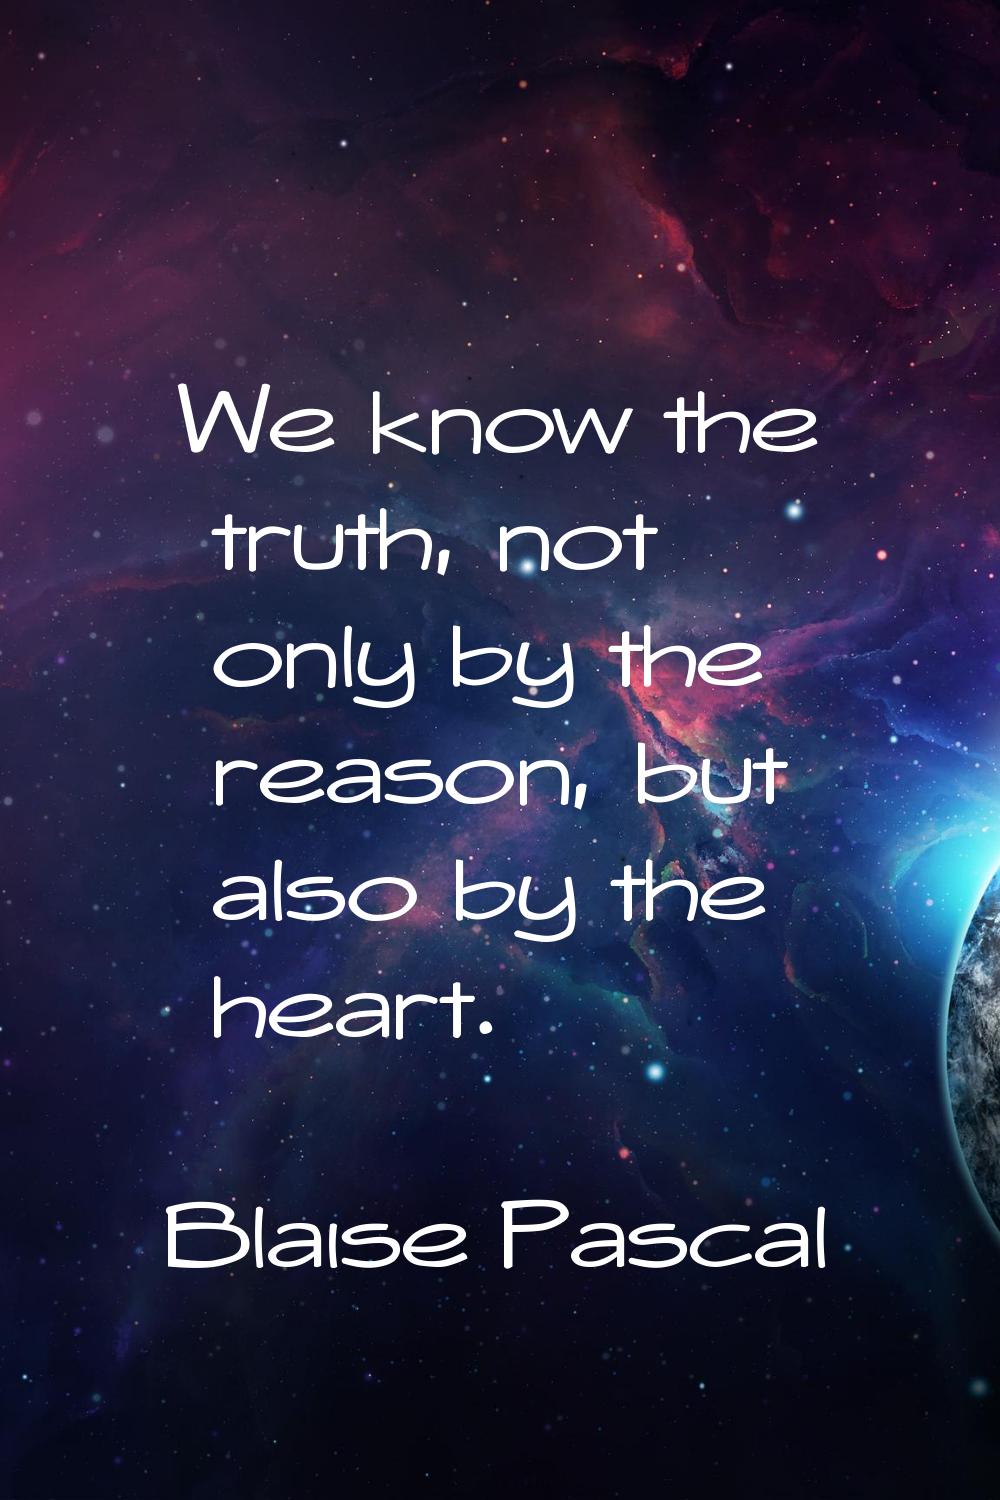 We know the truth, not only by the reason, but also by the heart.